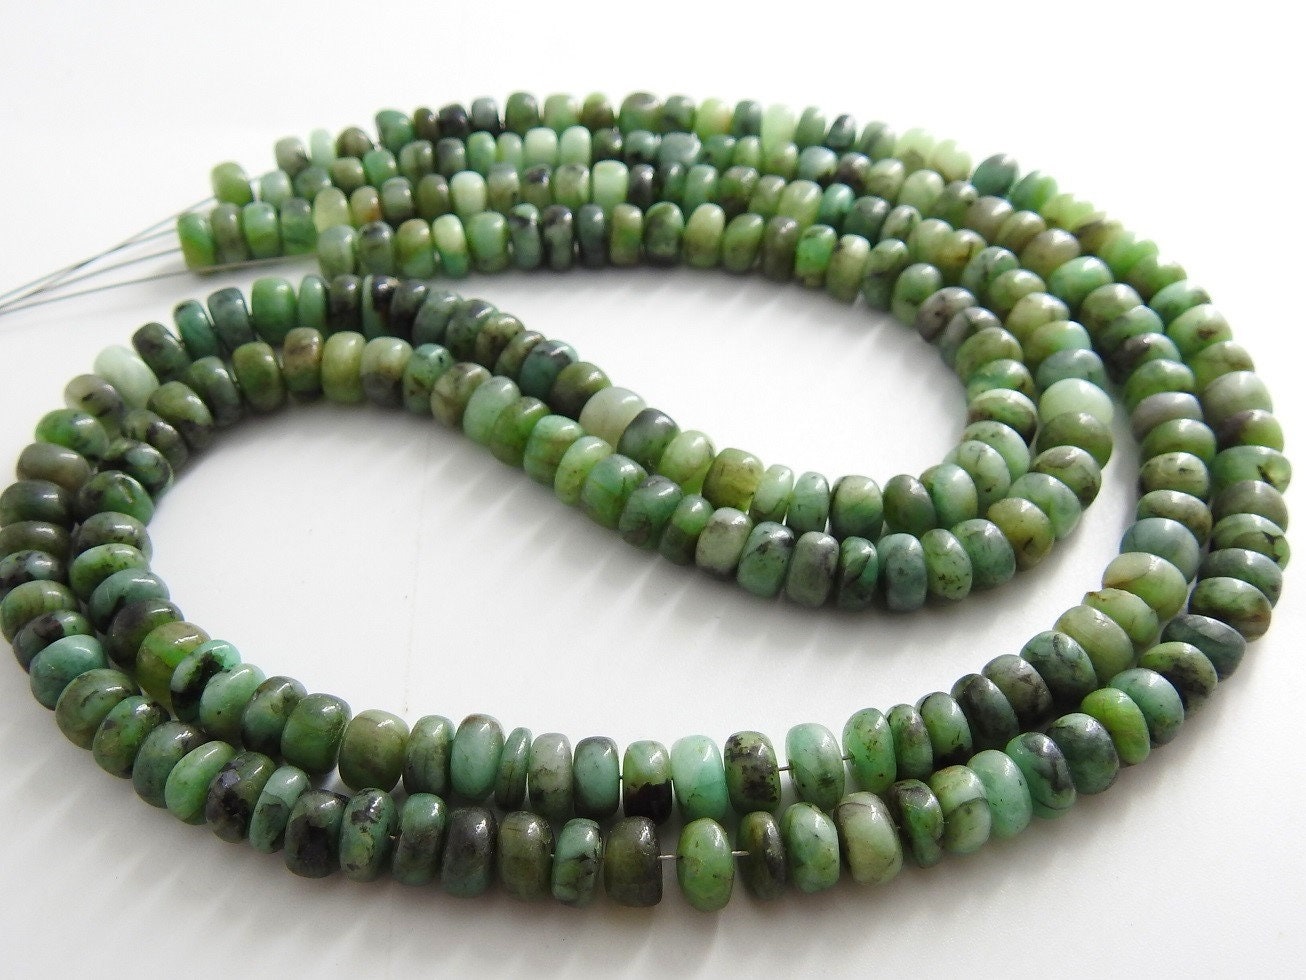 Emerald Smooth Roundel Bead,Shaded,Loose Stone,Handmade,Wholesale Price,New Arrival,18Inch Strand 100%Natural PME(B12) | Save 33% - Rajasthan Living 18